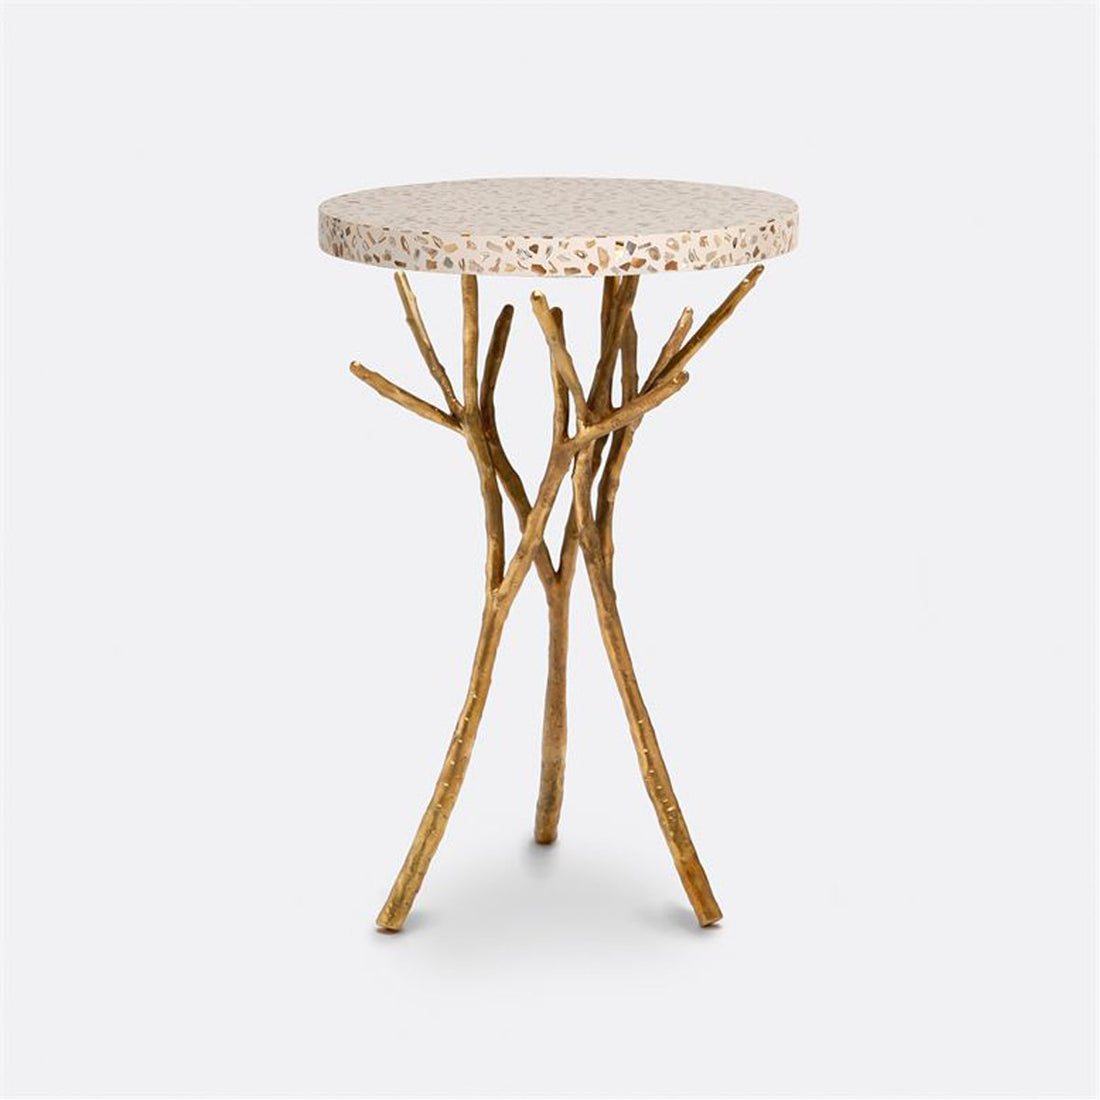 Made Goods Tressa Tree Bramble Table in Shell Top